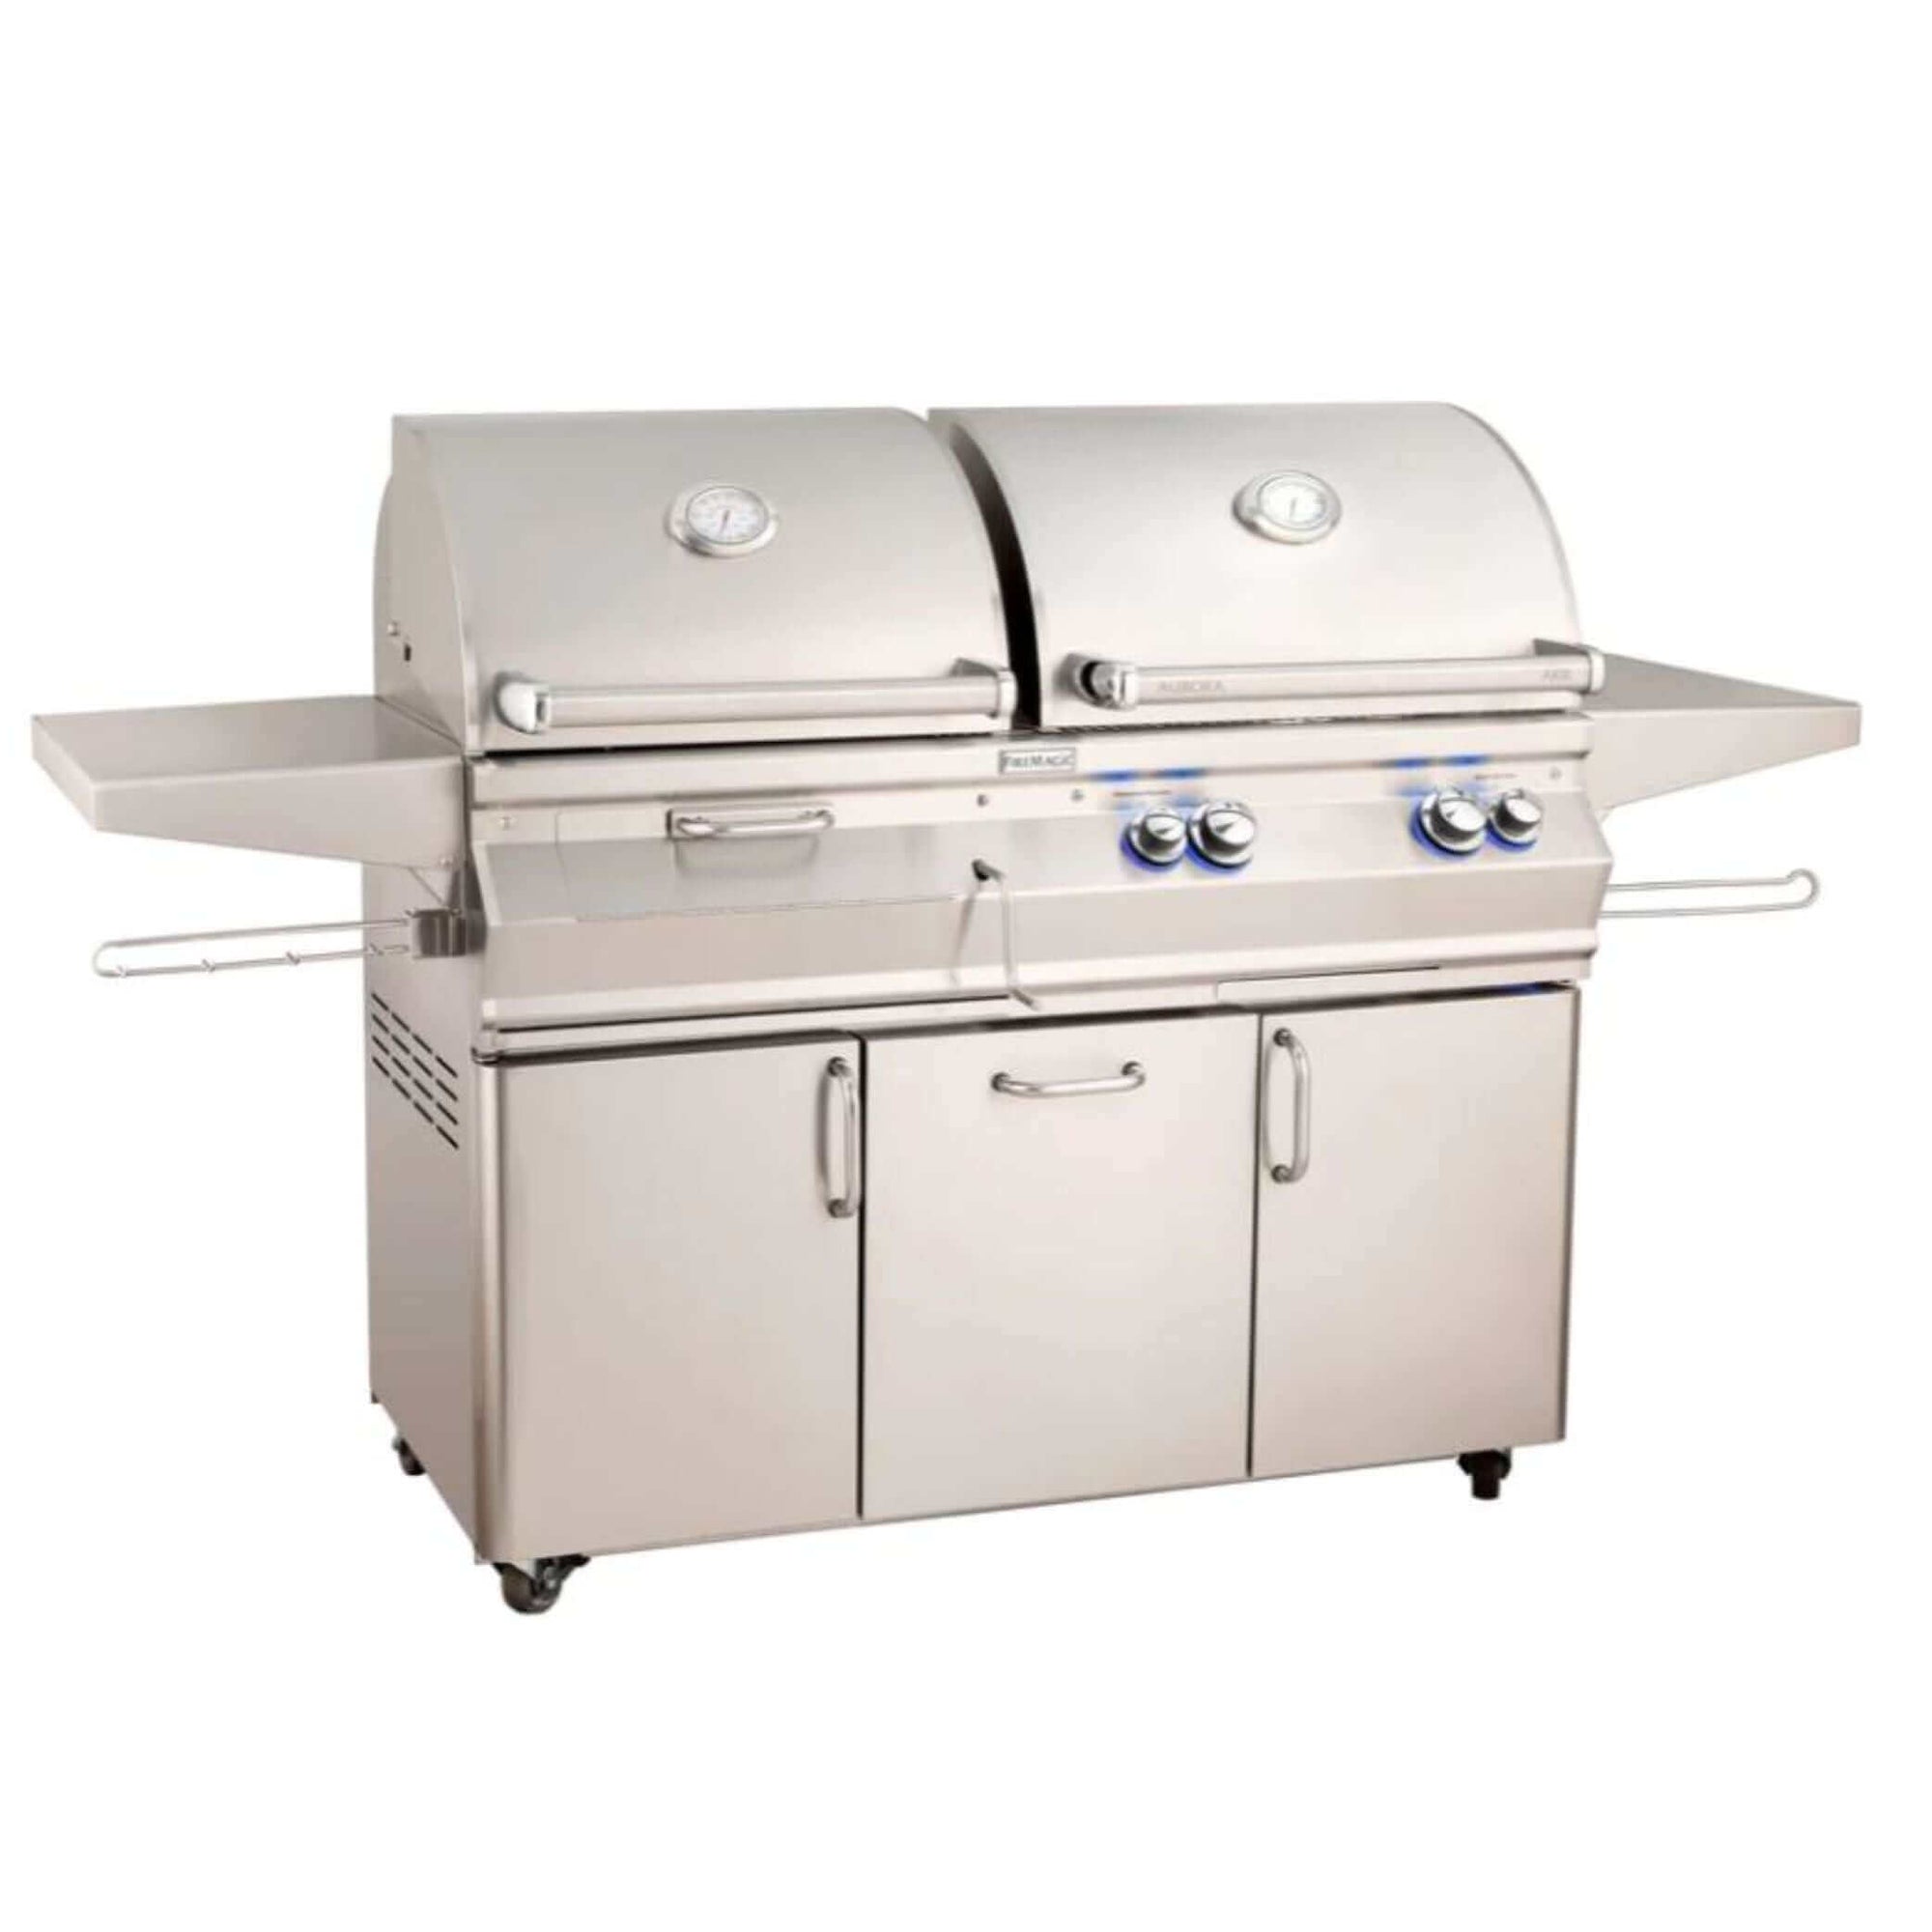 Fire Magic Aurora A830S 46" Gas/Charcoal Freestanding Grill With Analog Thermometer-Natural Gas